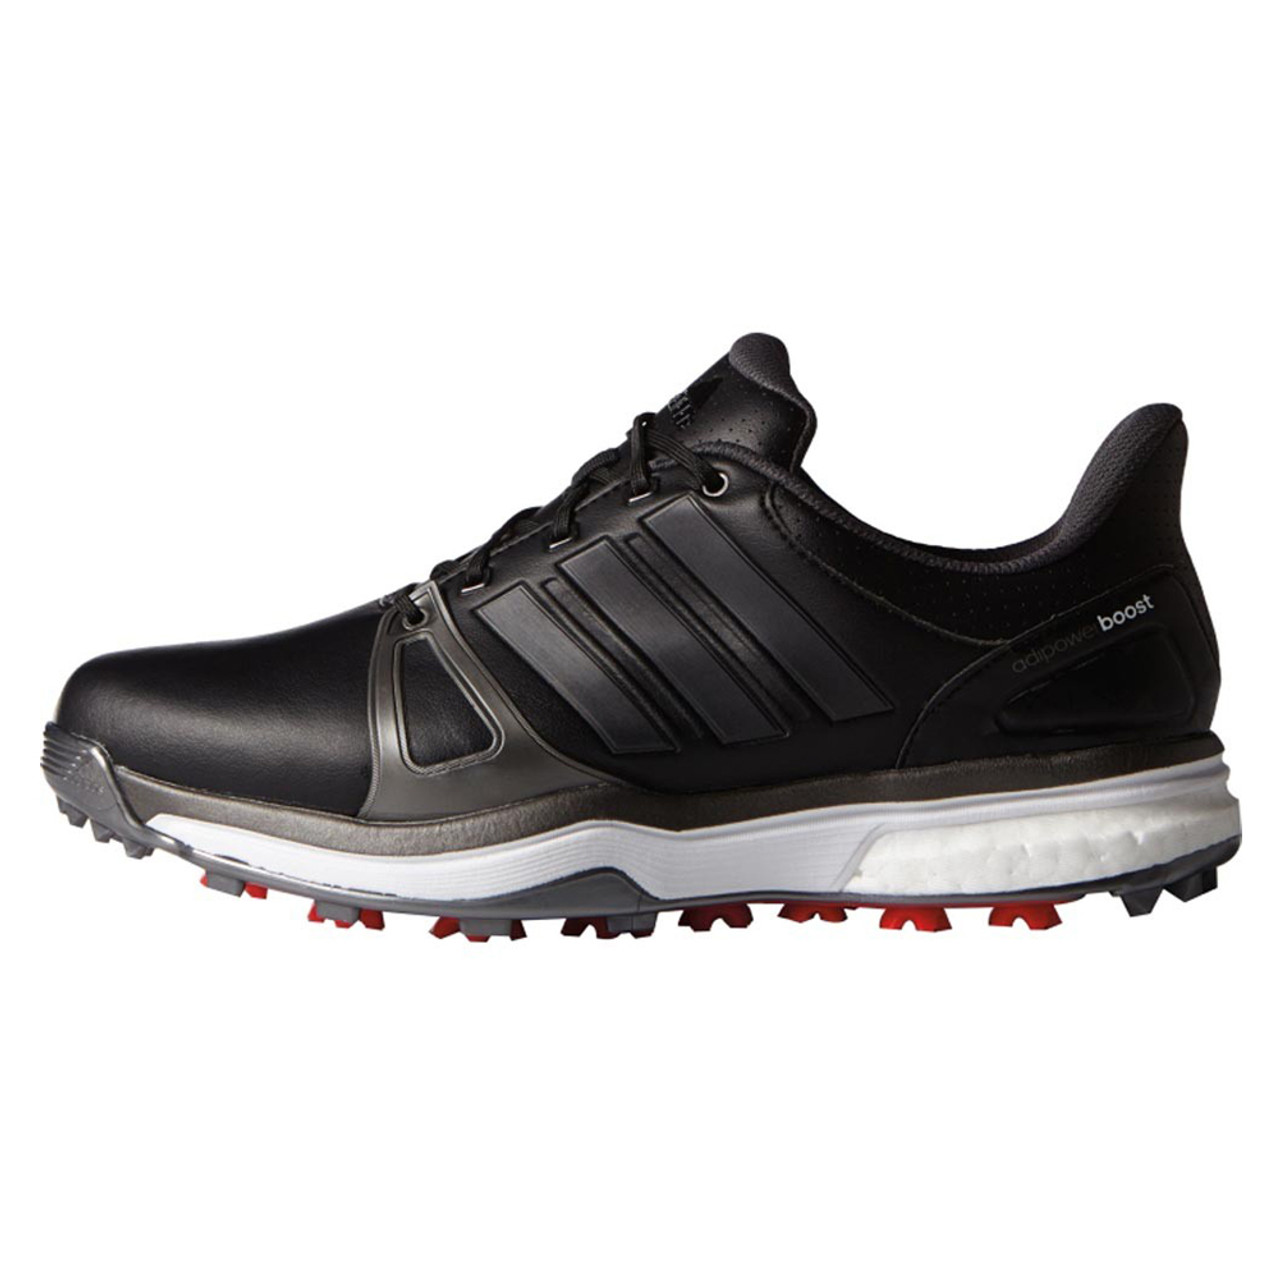 Adidas Men's Adipower Boost 2 Golf Cleat - Black | Discount Adidas Men's  Athletic Shoes & More  